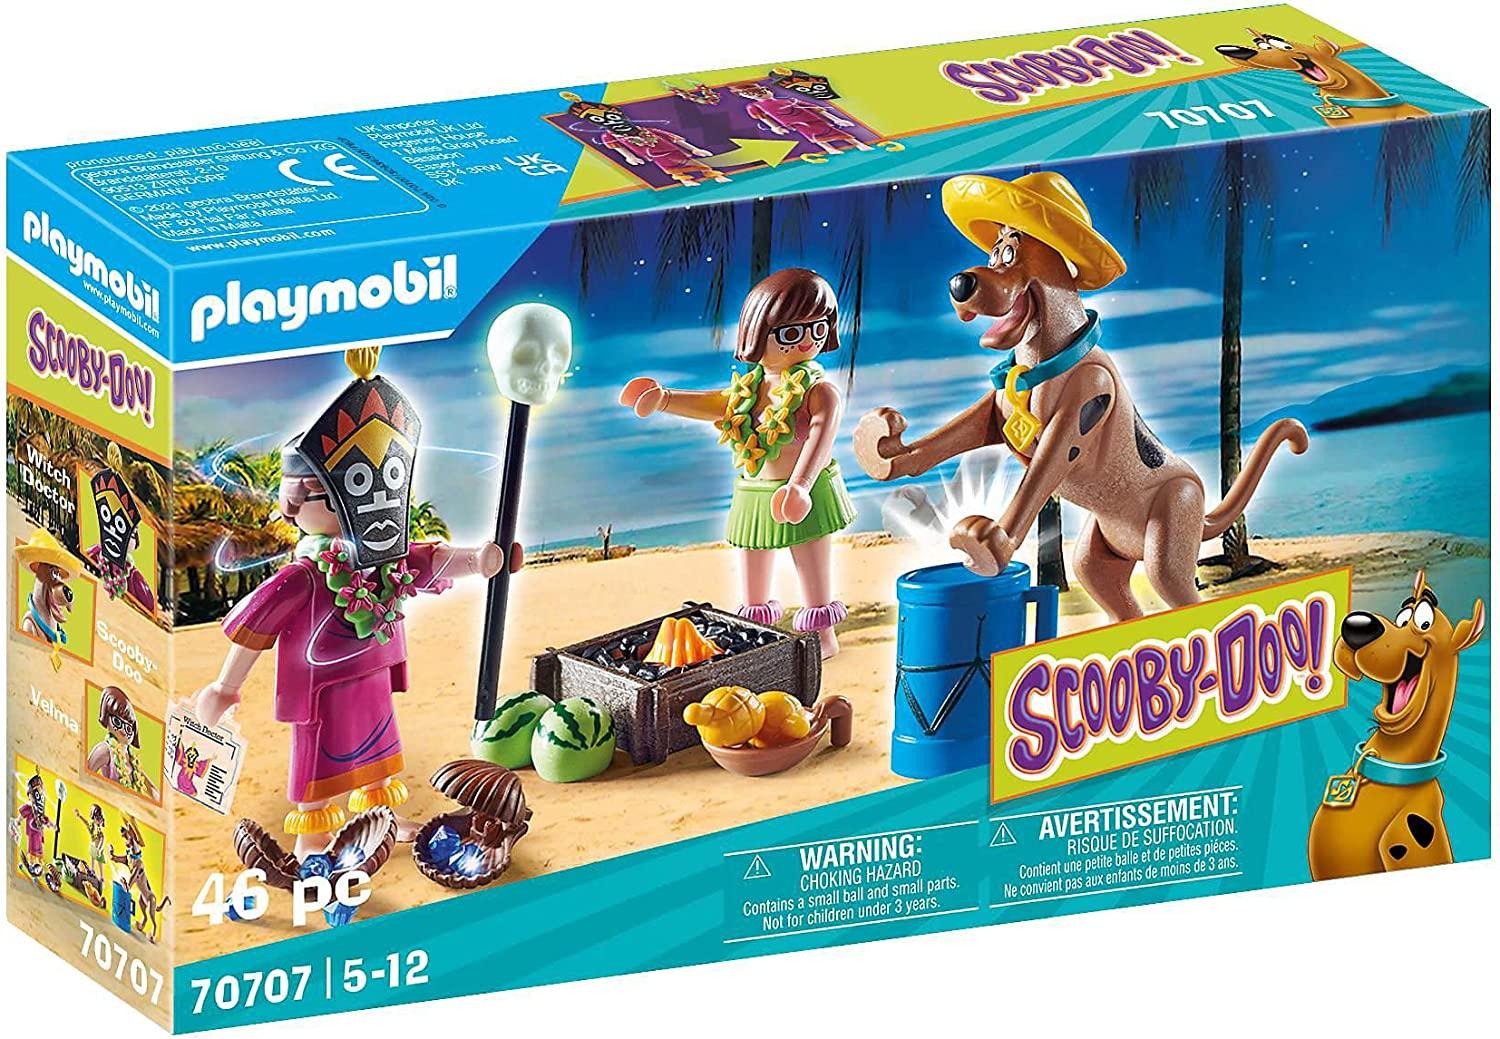 Playmobil Scooby-Doo! Adventure with Witch Doctor for $7.99